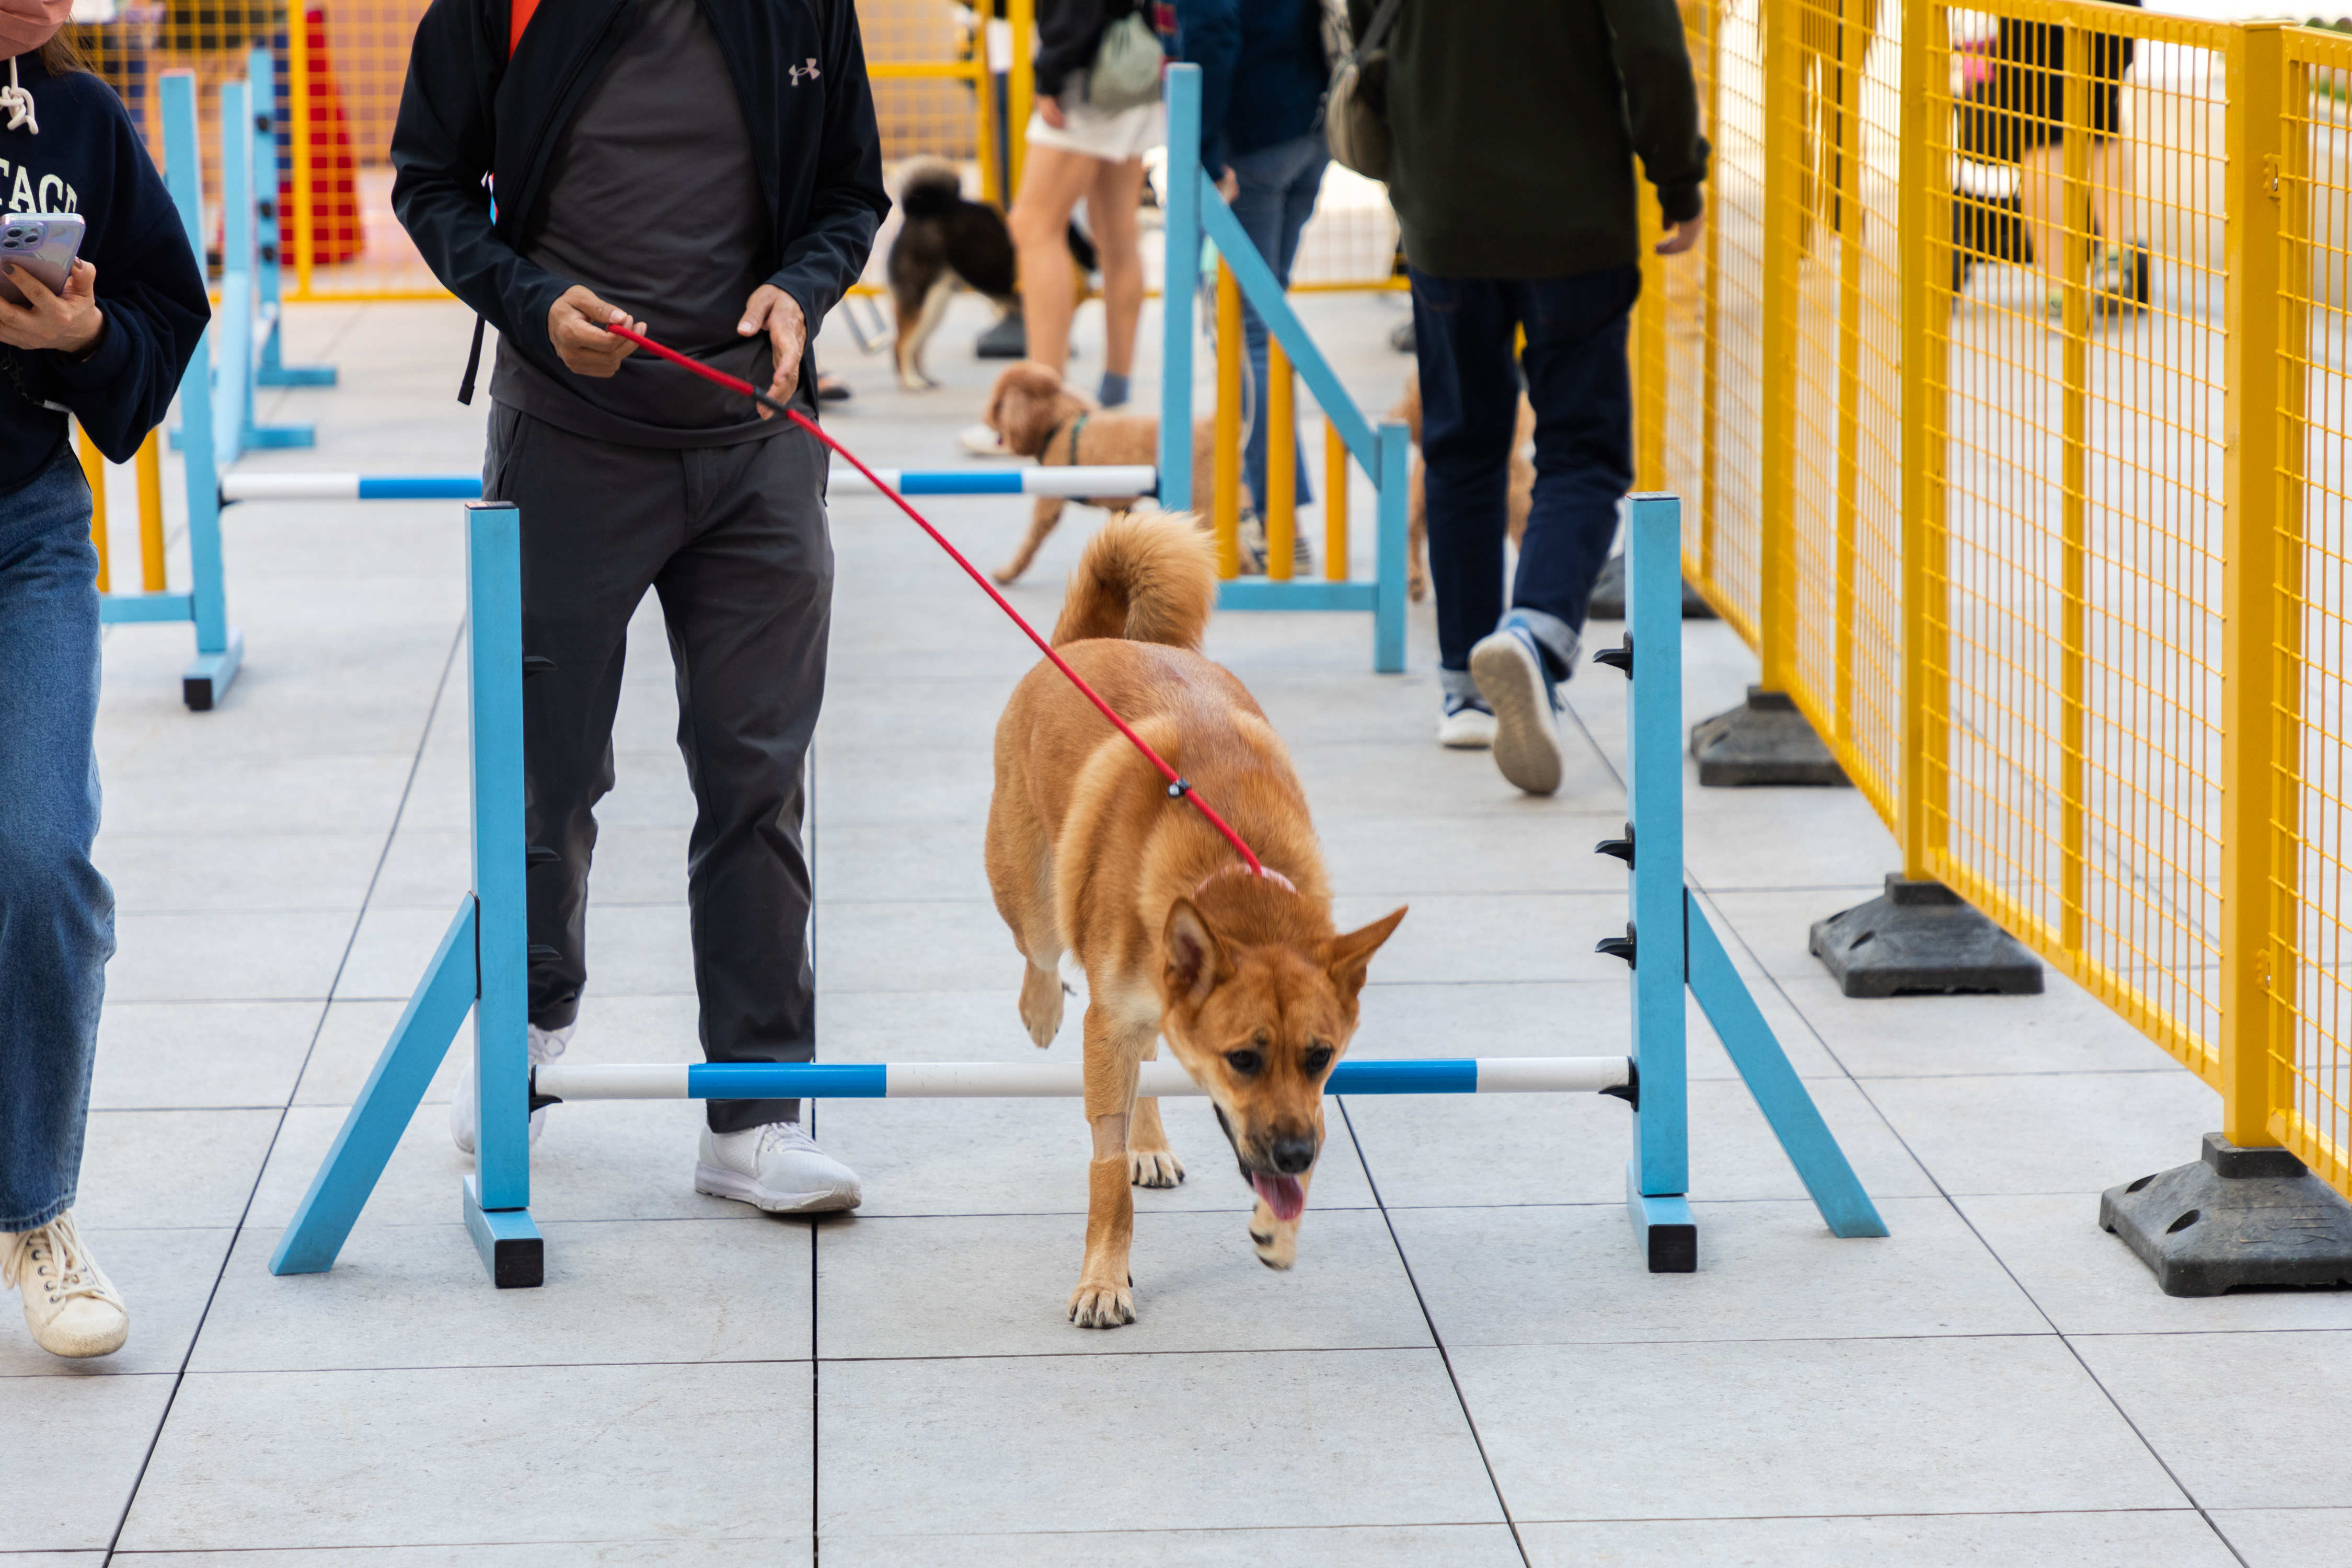 Visitors guided their dogs through different obstacles in the dog playground.